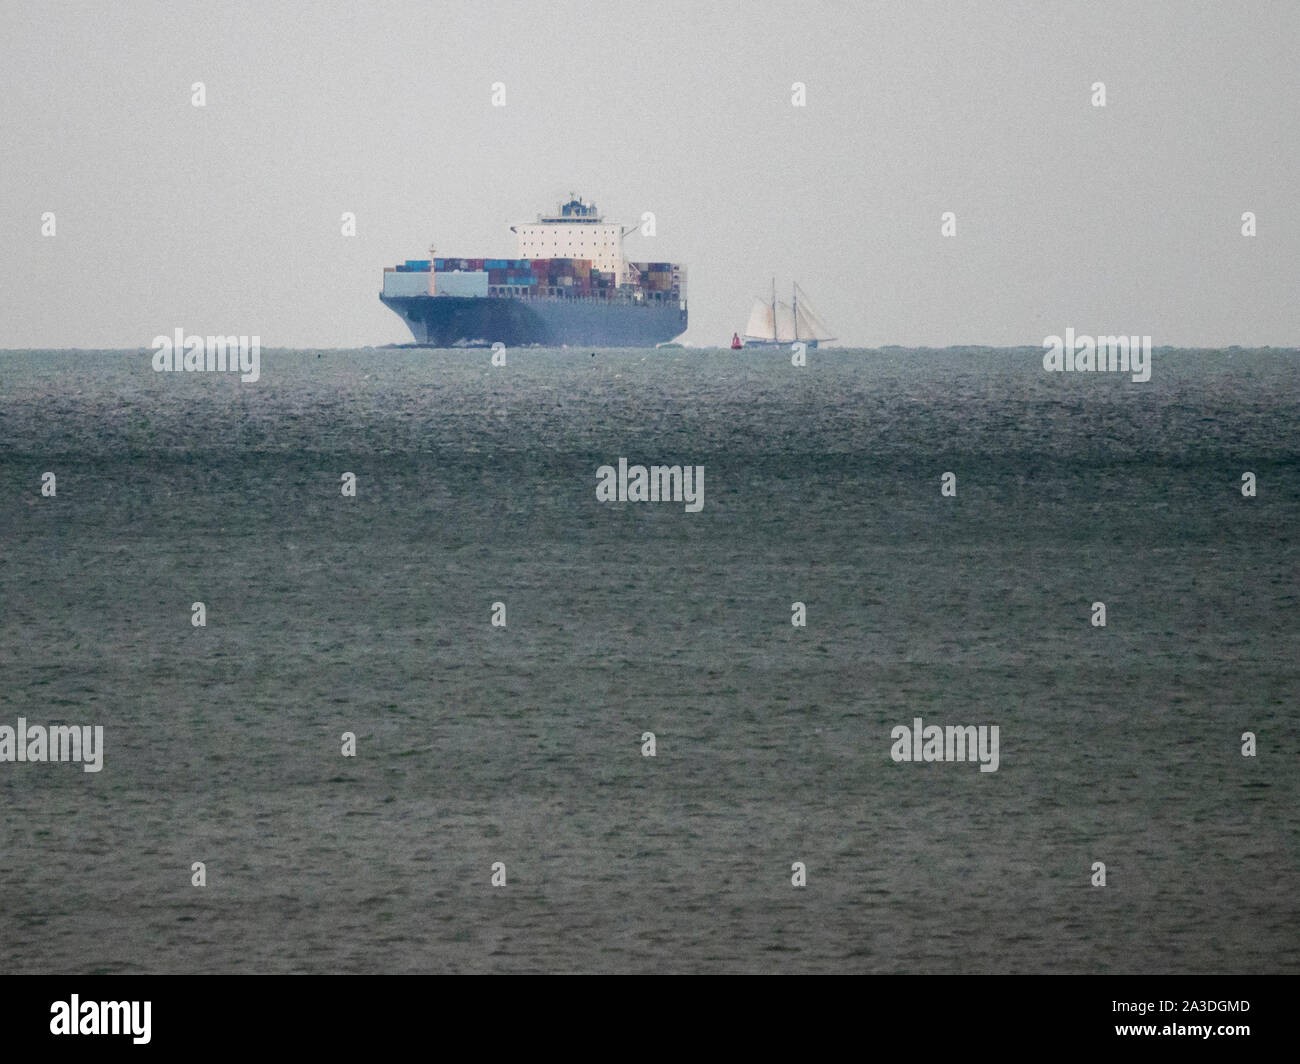 Sheerness, Kent, UK. 7th October, 2019. Historic sailing ship De Gallant seen sailing  passing Sheerness, Kent just before nightfall this evening in foul weather before anchoring overnight. De Gallant is transporting a special cargo of wine, coffee, spices and more to London. It’s thought to be the first major cargo arriving by sail since the 1960s. Picture: seen crossing the path of modern containership SM Charleston. Credit: James Bell/Alamy Live News Stock Photo